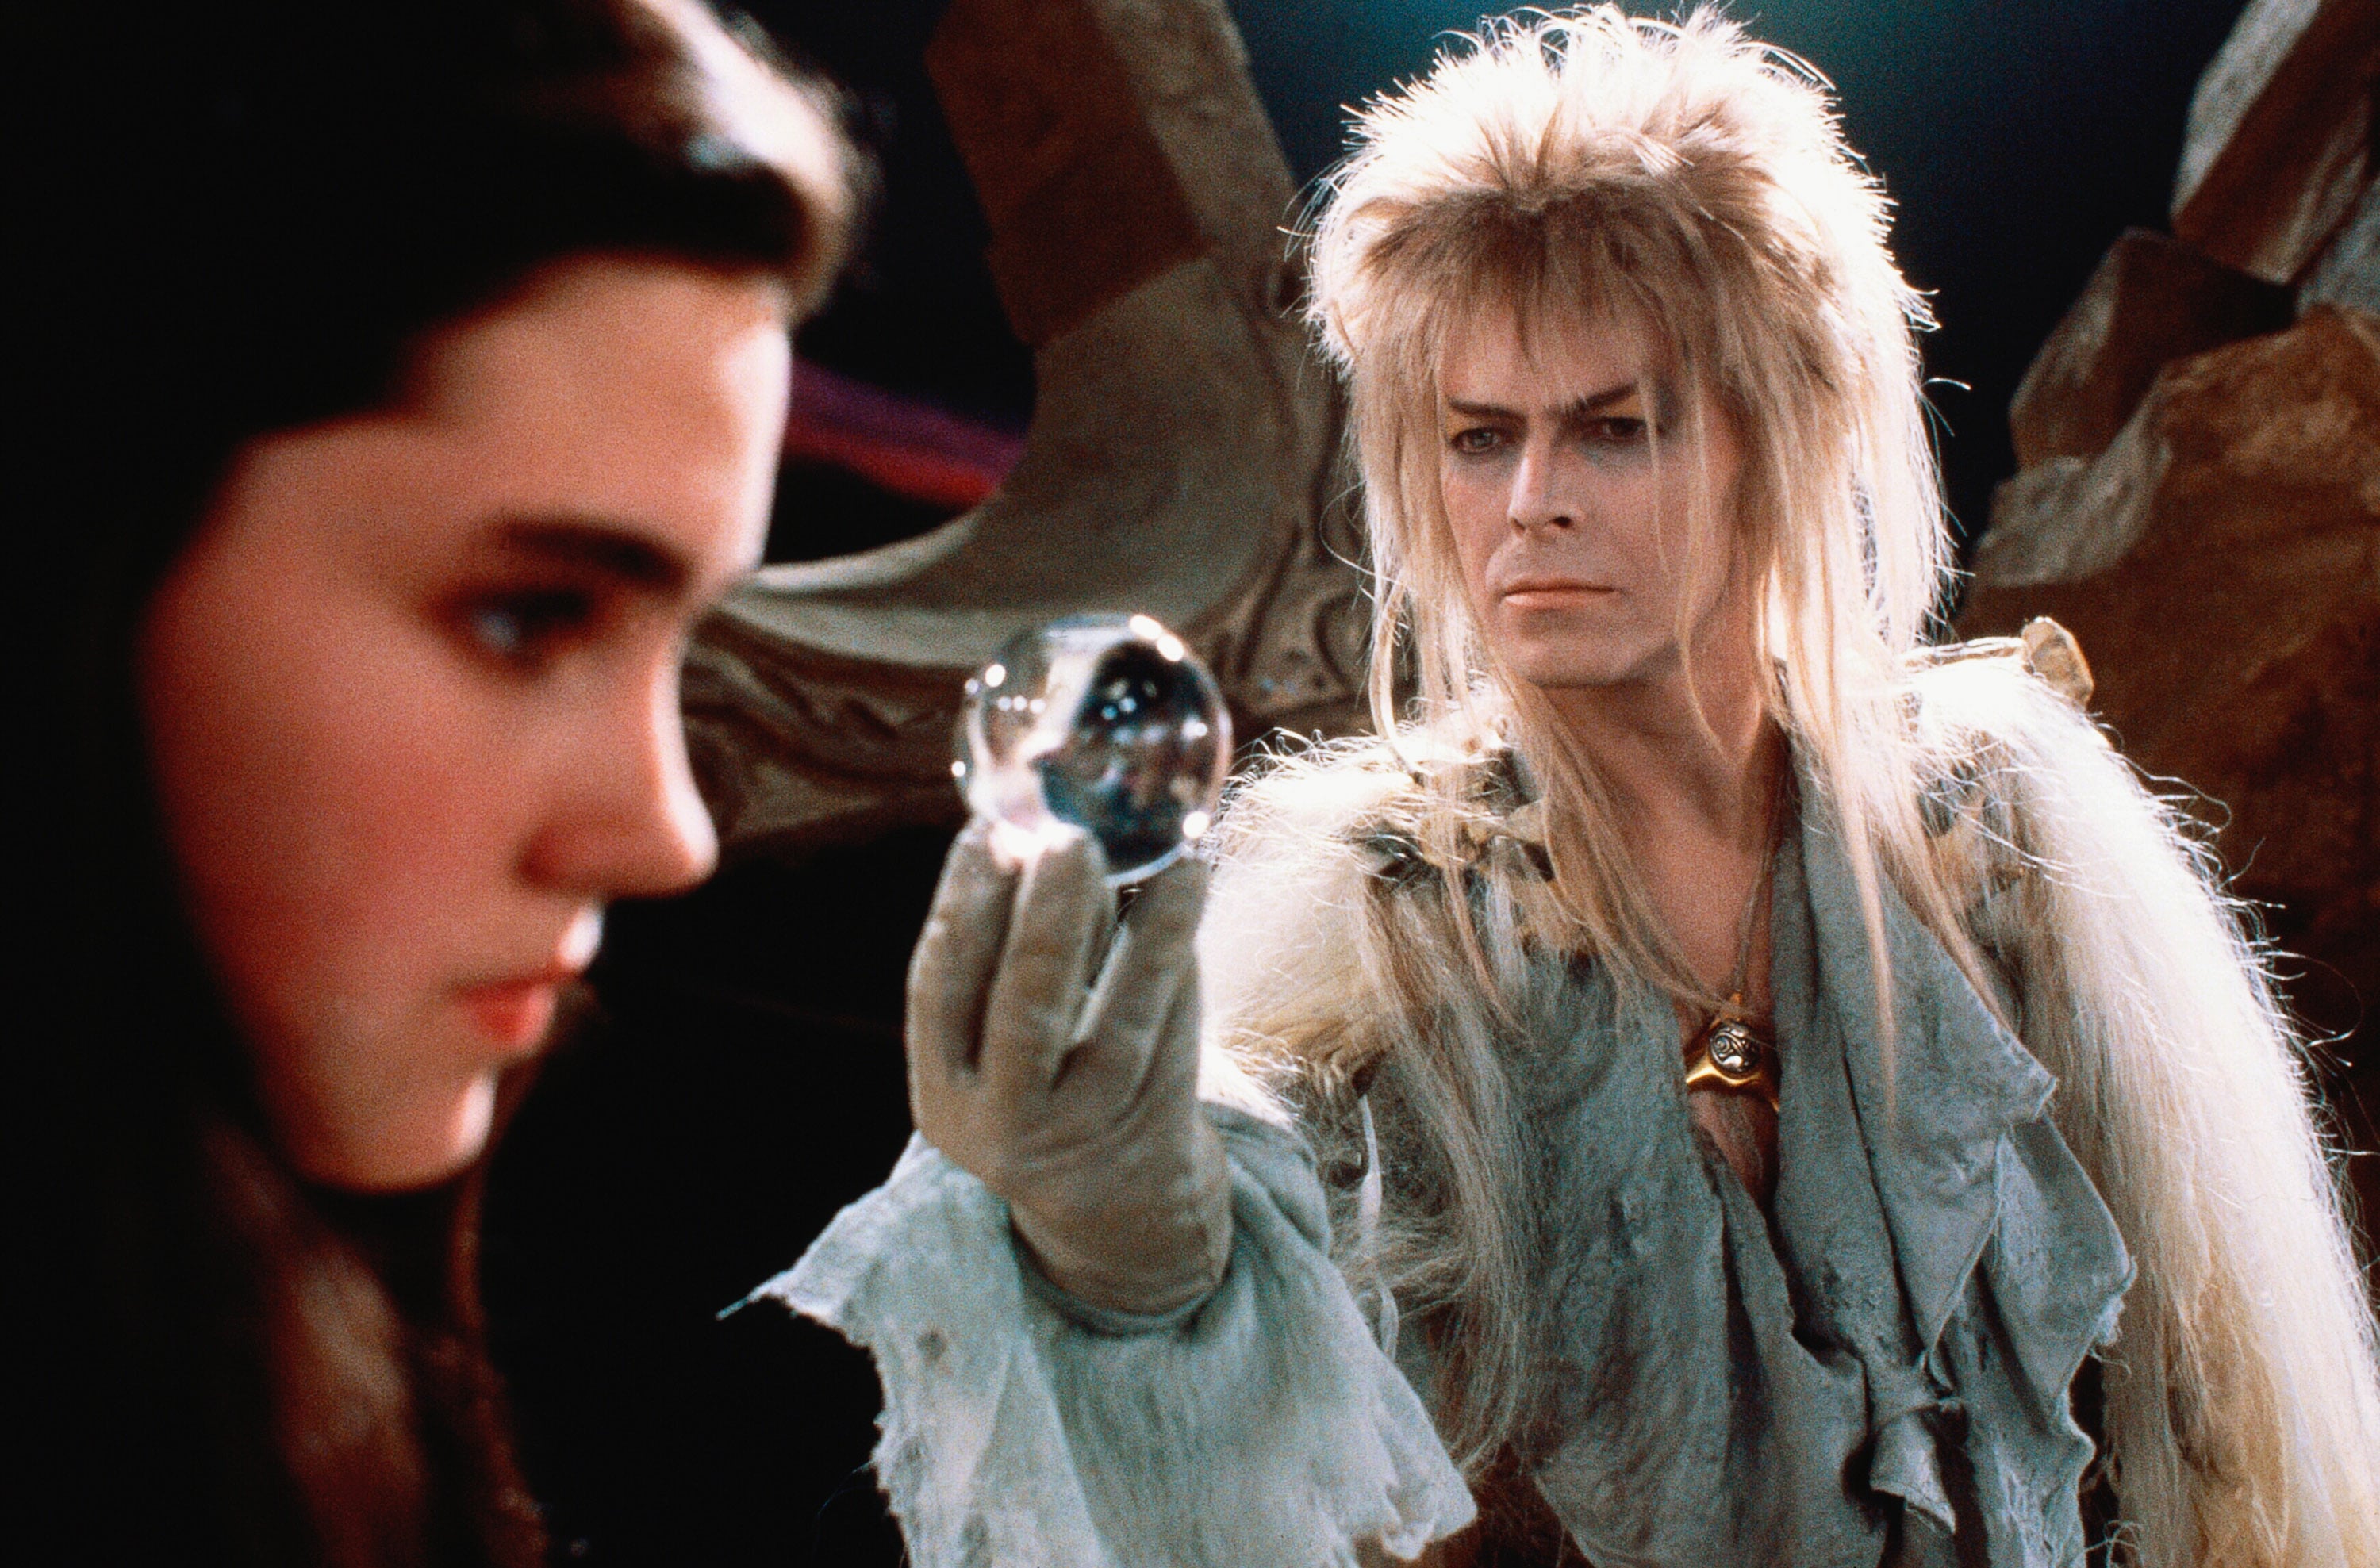 Jennifer Connelly was very young when she starred in iconic Labyrinth role  with David Bowie